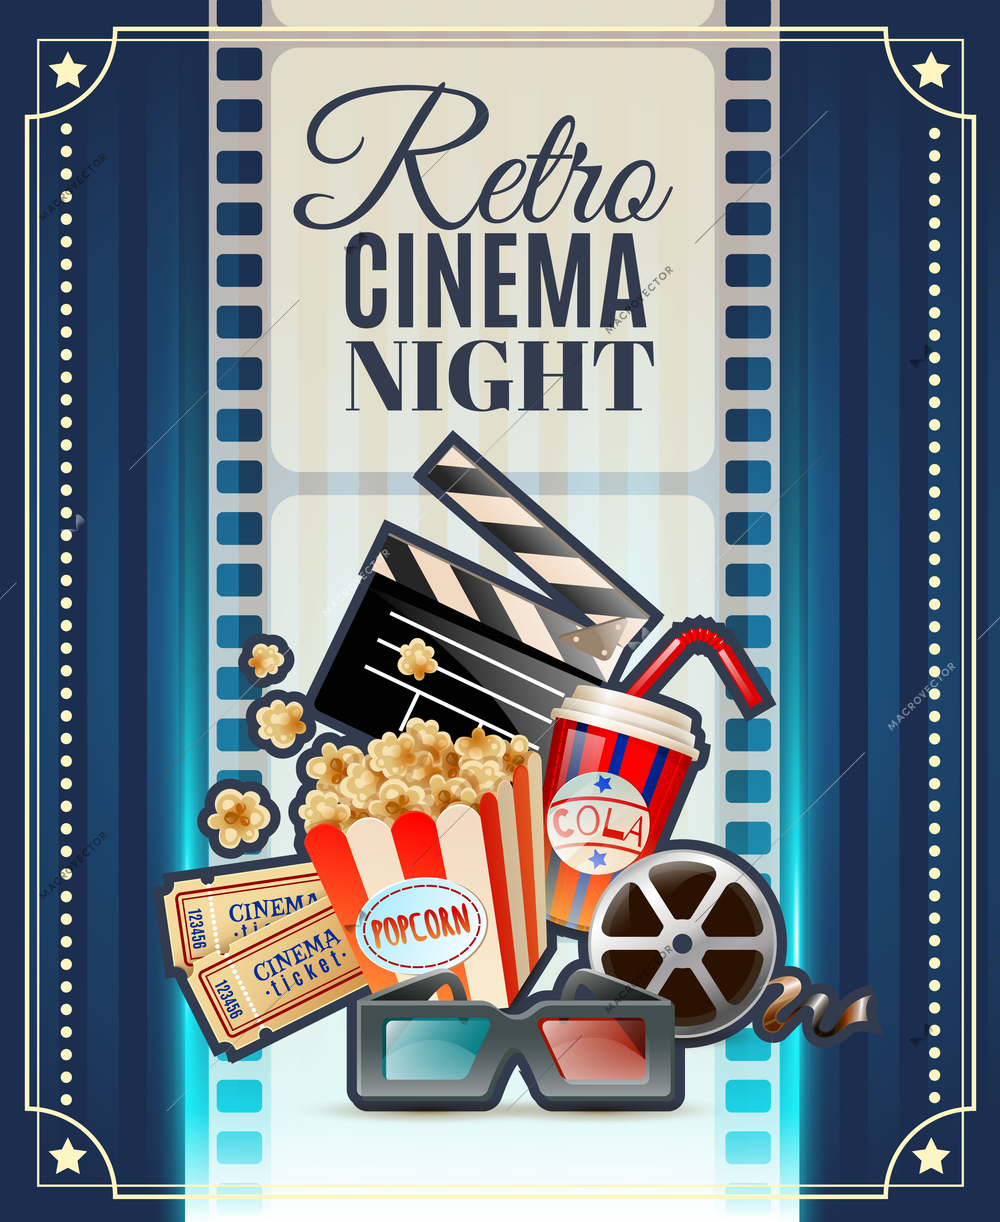 Retro cinema club night invitation poster  with movie theater tickets 3d glasses and popcorn snack vector illustration